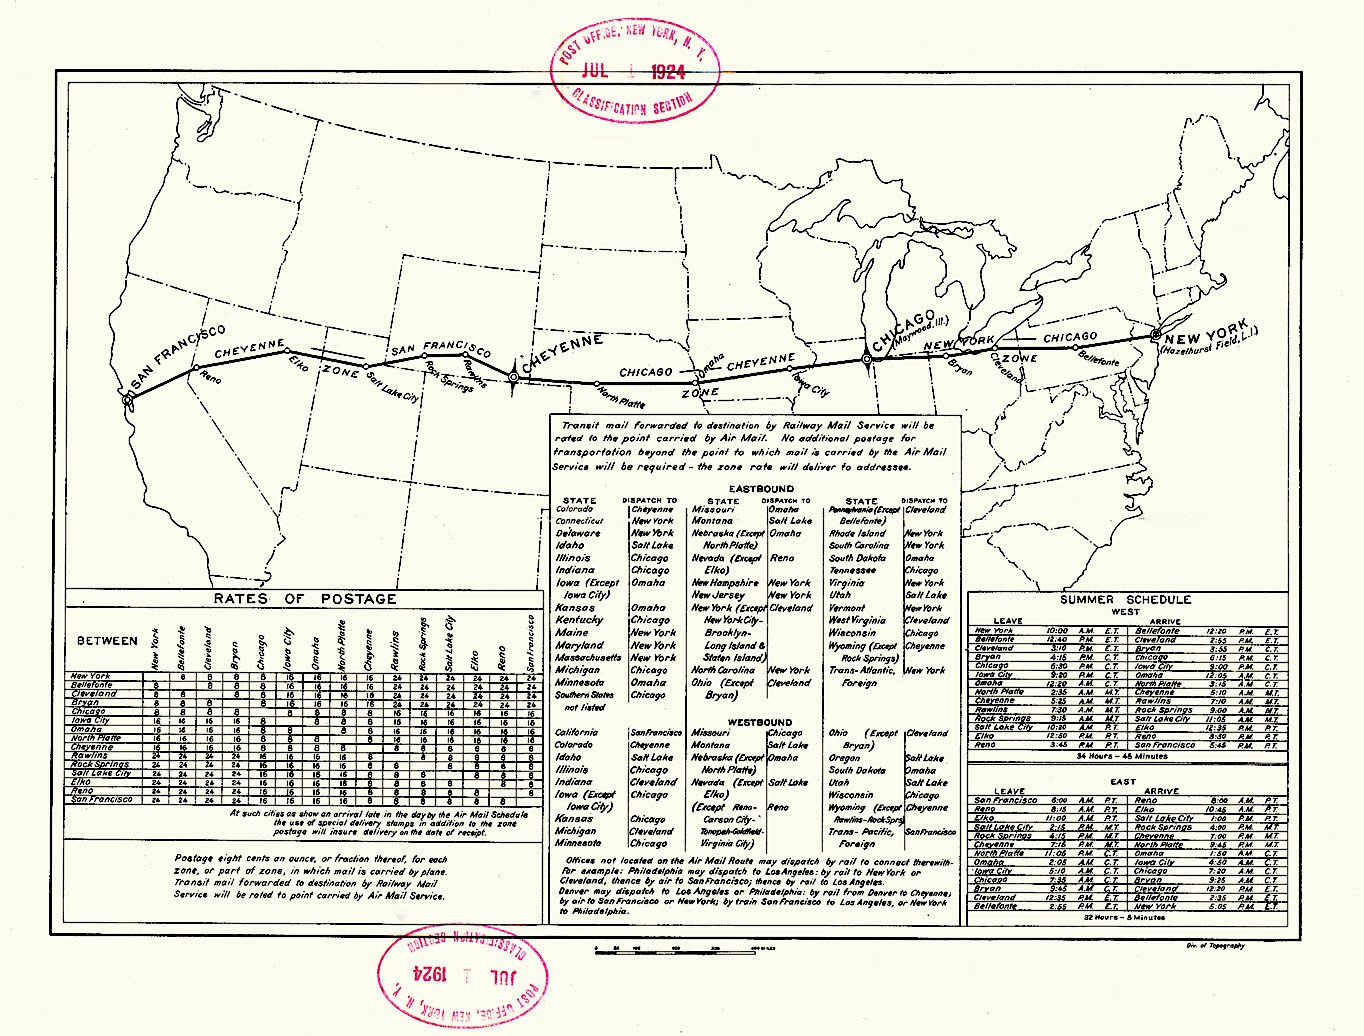 Air Mail Route map, 1924